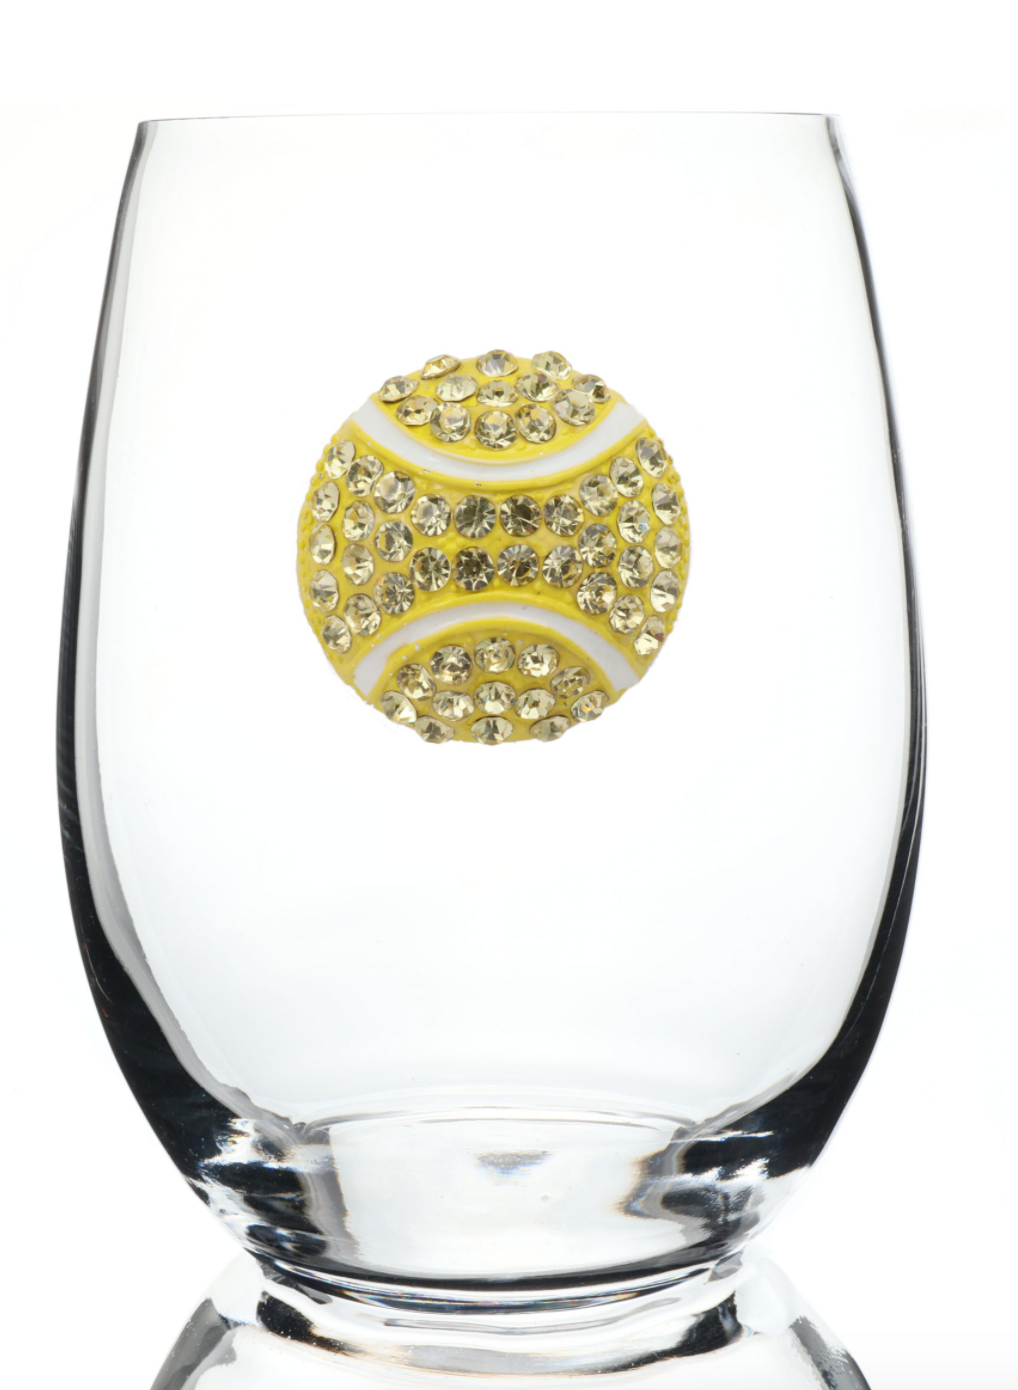 Tennis Ball Bedazzled Stemless Wine Glass